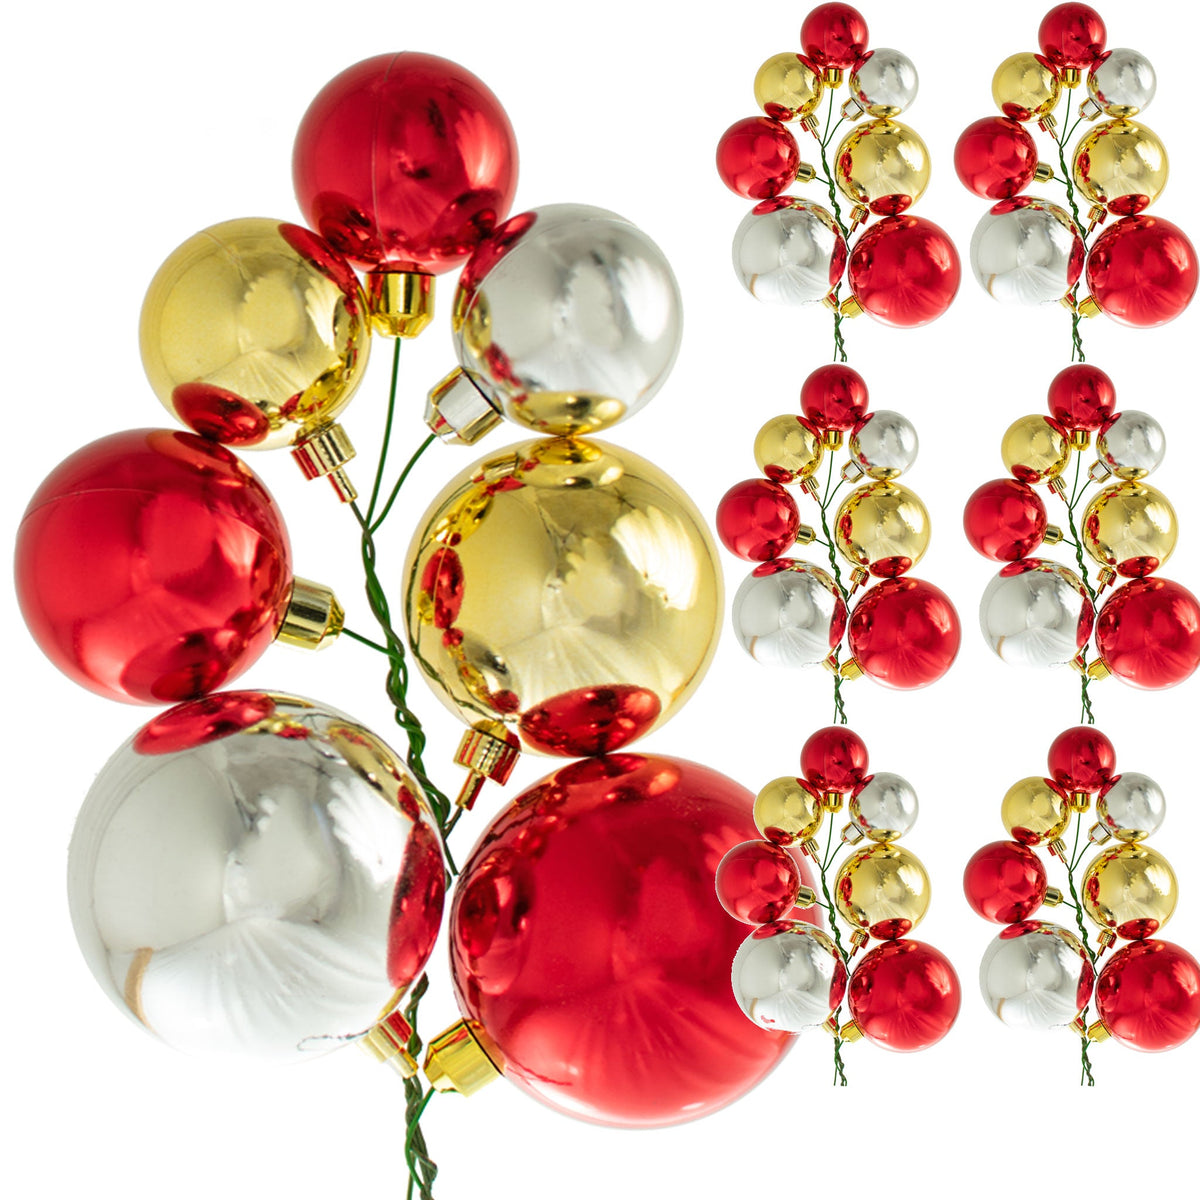 Christmas Ball Ornament Clusters on sale in packs of 6 from Lee Display